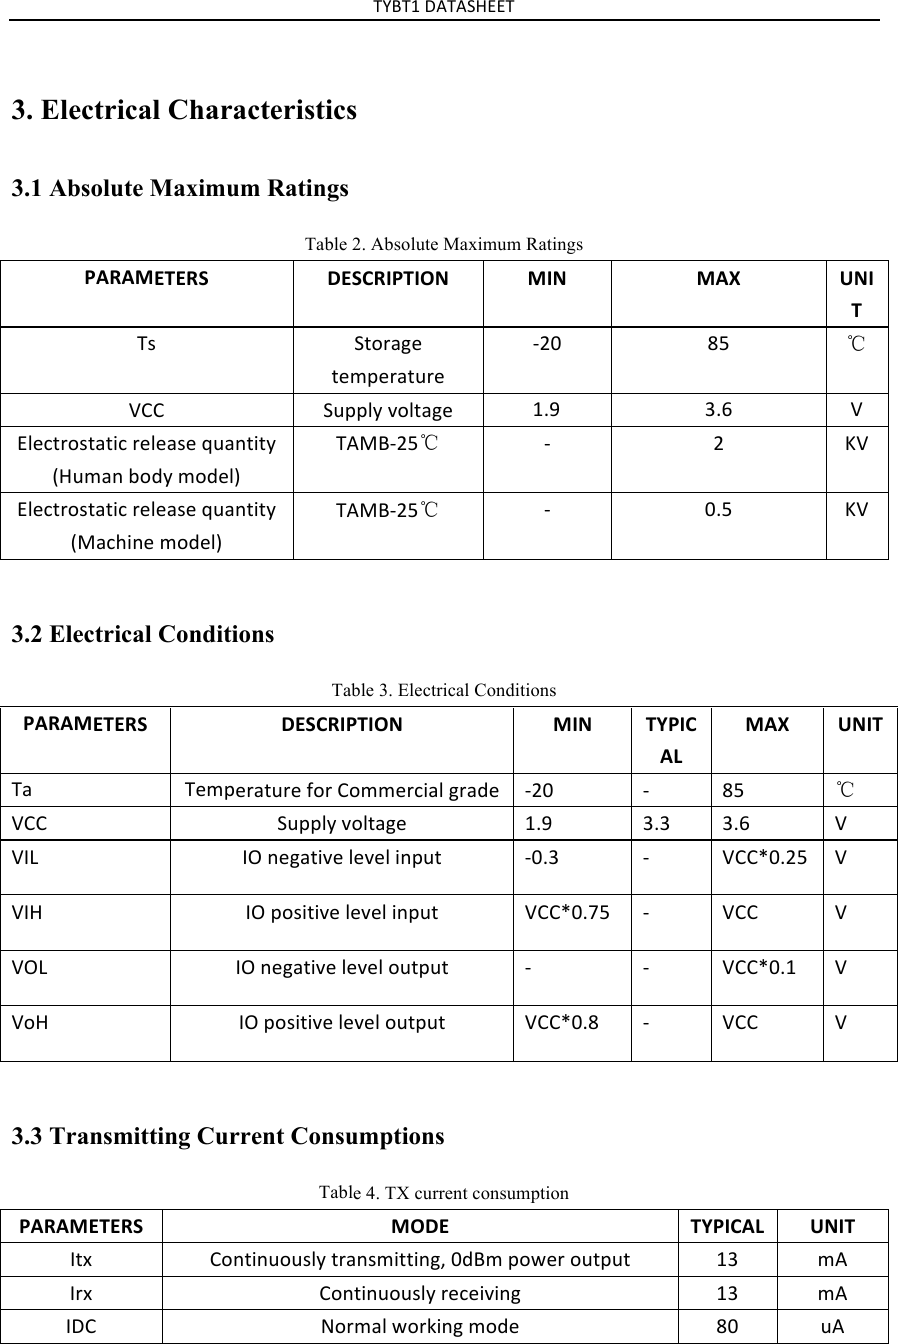 TYBT1%DATASHEET%3. Electrical Characteristics3.1 Absolute Maximum Ratings Table 2. Absolute Maximum Ratings PARAMETERS$DESCRIPTION$MIN$MAX$UNIT$Ts%Storage%temperature%-20%85%℃VCC%Supply%voltage%1.9%3.6%V%Electrostatic%release%quantity%(Human%body%model)%TAMB-25℃%-% 2% KV%Electrostatic%release%quantity%(Machine%model)%TAMB-25℃%-% 0.5%KV%3.2 Electrical Conditions Table 3. Electrical Conditions PARAMETERS$DESCRIPTION$MIN$TYPICAL$MAX$UNIT$Ta%Temperature%for%Commercial%grade% -20% -% 85%℃VCC%Supply%voltage%1.9%3.3%3.6% V%VIL%IO%negative%level%input% -0.3% -% VCC*0.25% V%VIH%IO%positive%level%input%VCC*0.75% -% VCC% V%VOL%IO%negative%level%output% -% -% VCC*0.1% V%VoH%IO%positive%level%output%VCC*0.8% -% VCC% V%3.3 Transmitting Current Consumptions Table 4. TX current consumption PARAMETERS$MODE$TYPICAL$UNIT$Itx% Continuously%transmitting,%0dBm%power%output%13%mA%Irx% Continuously%receiving%13%mA%IDC% Normal%working%mode%80%uA%